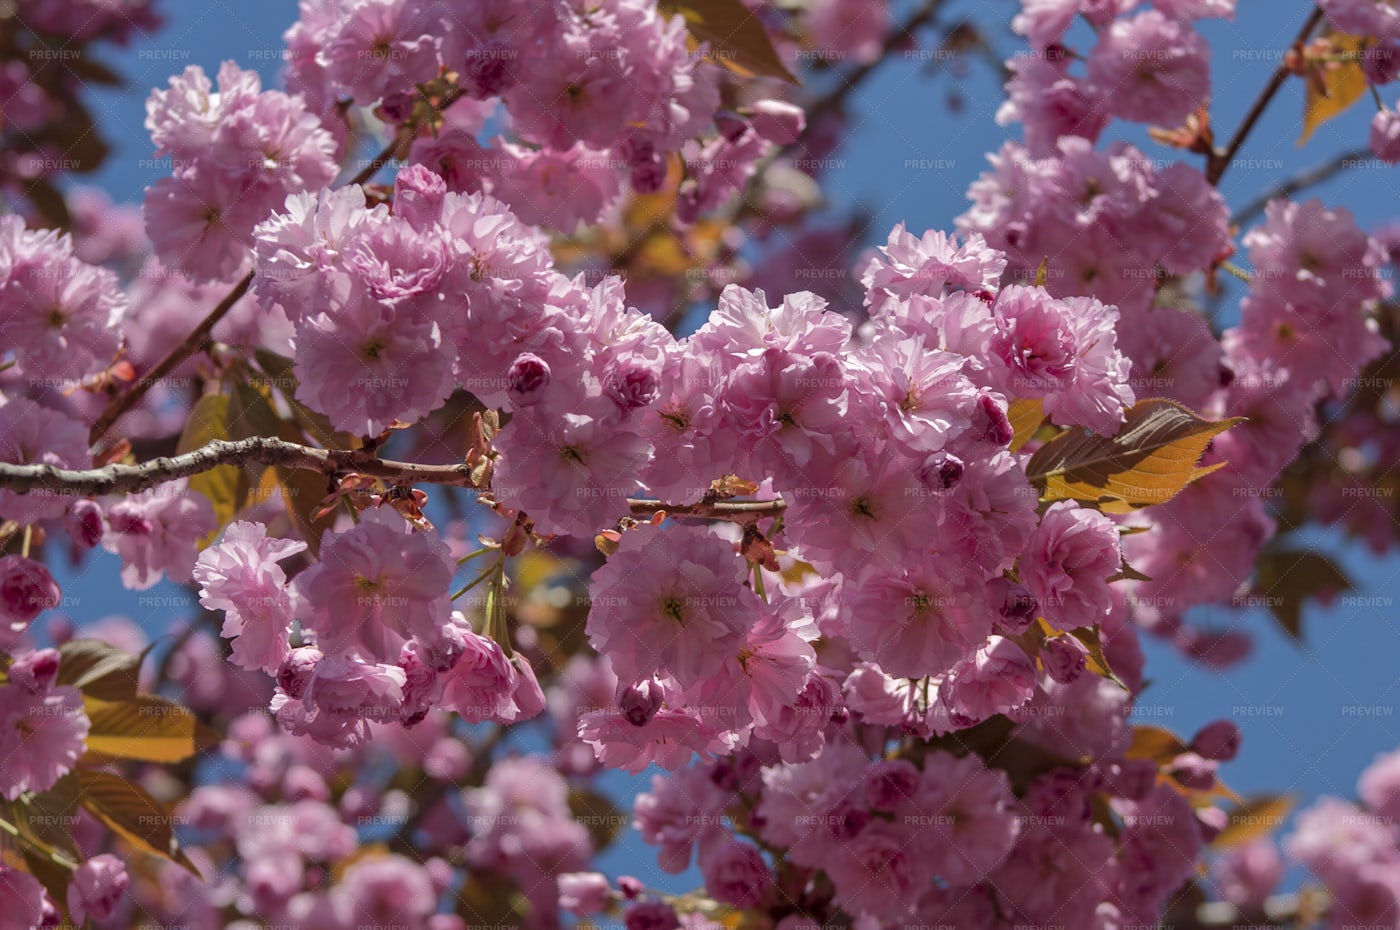 Tree With Pink Flowers: Stock Photos